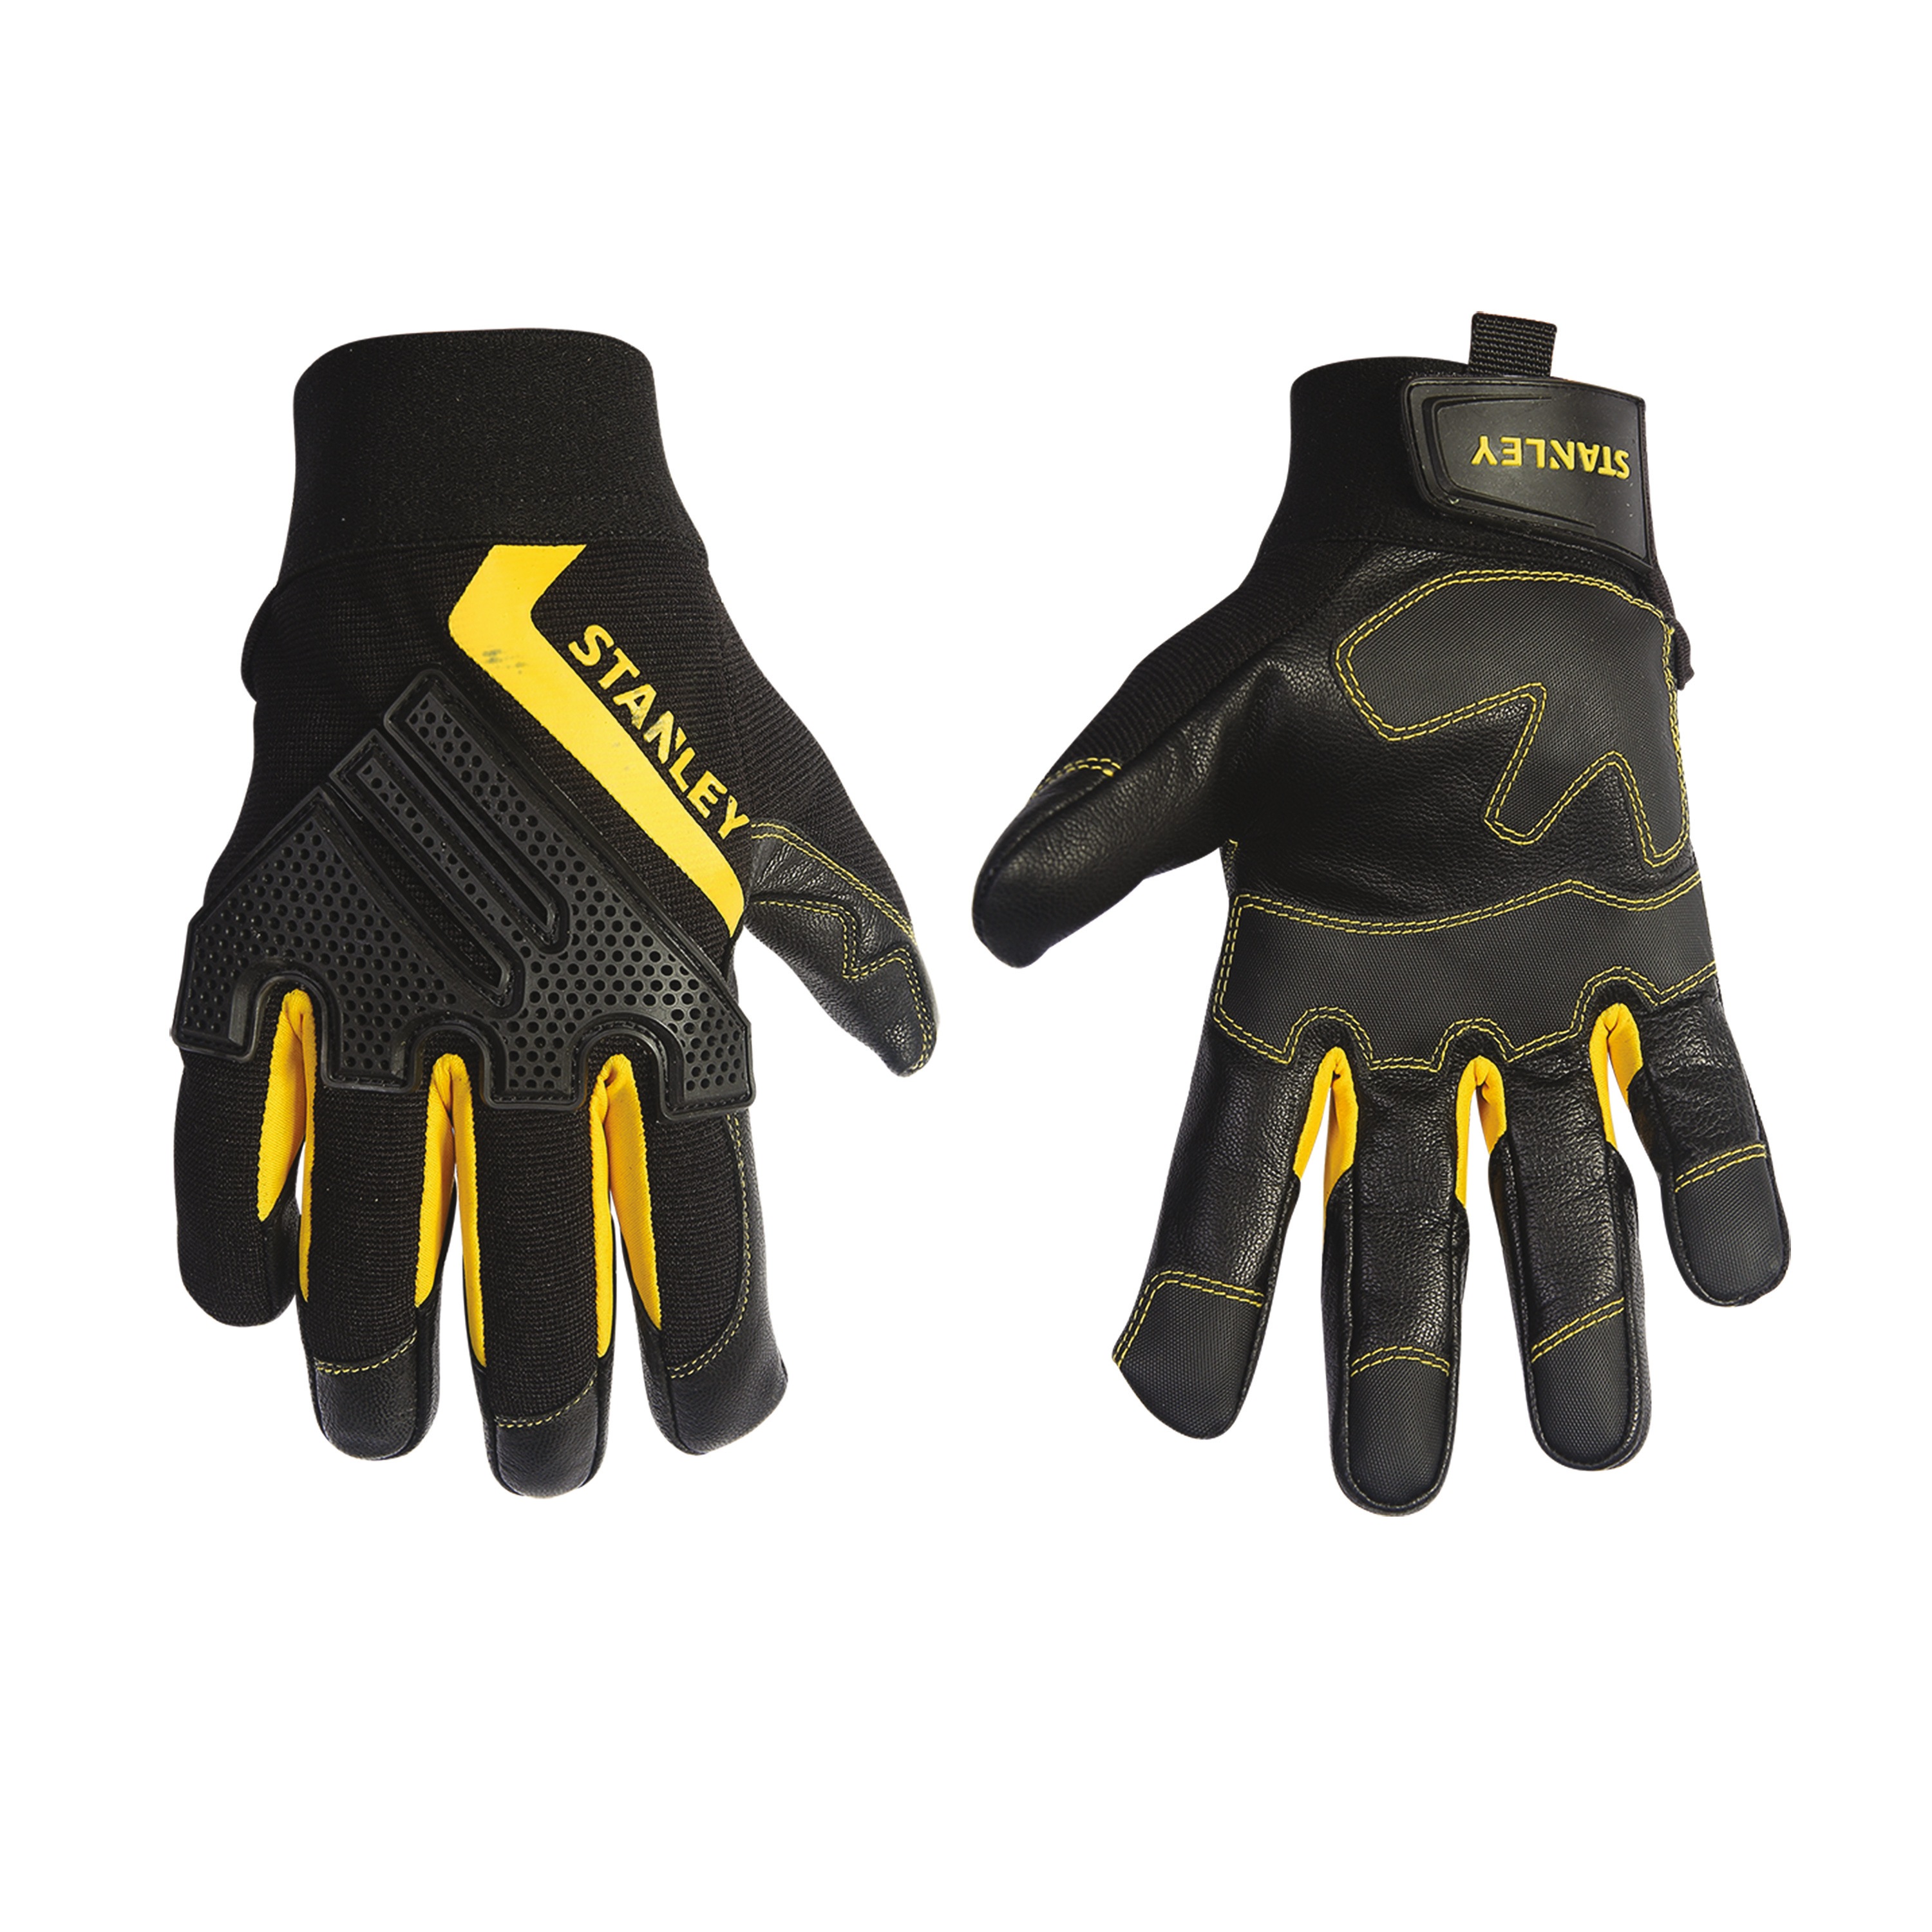 Stanley Tools - Goatskin Knuckle Guard Gloves - S77601